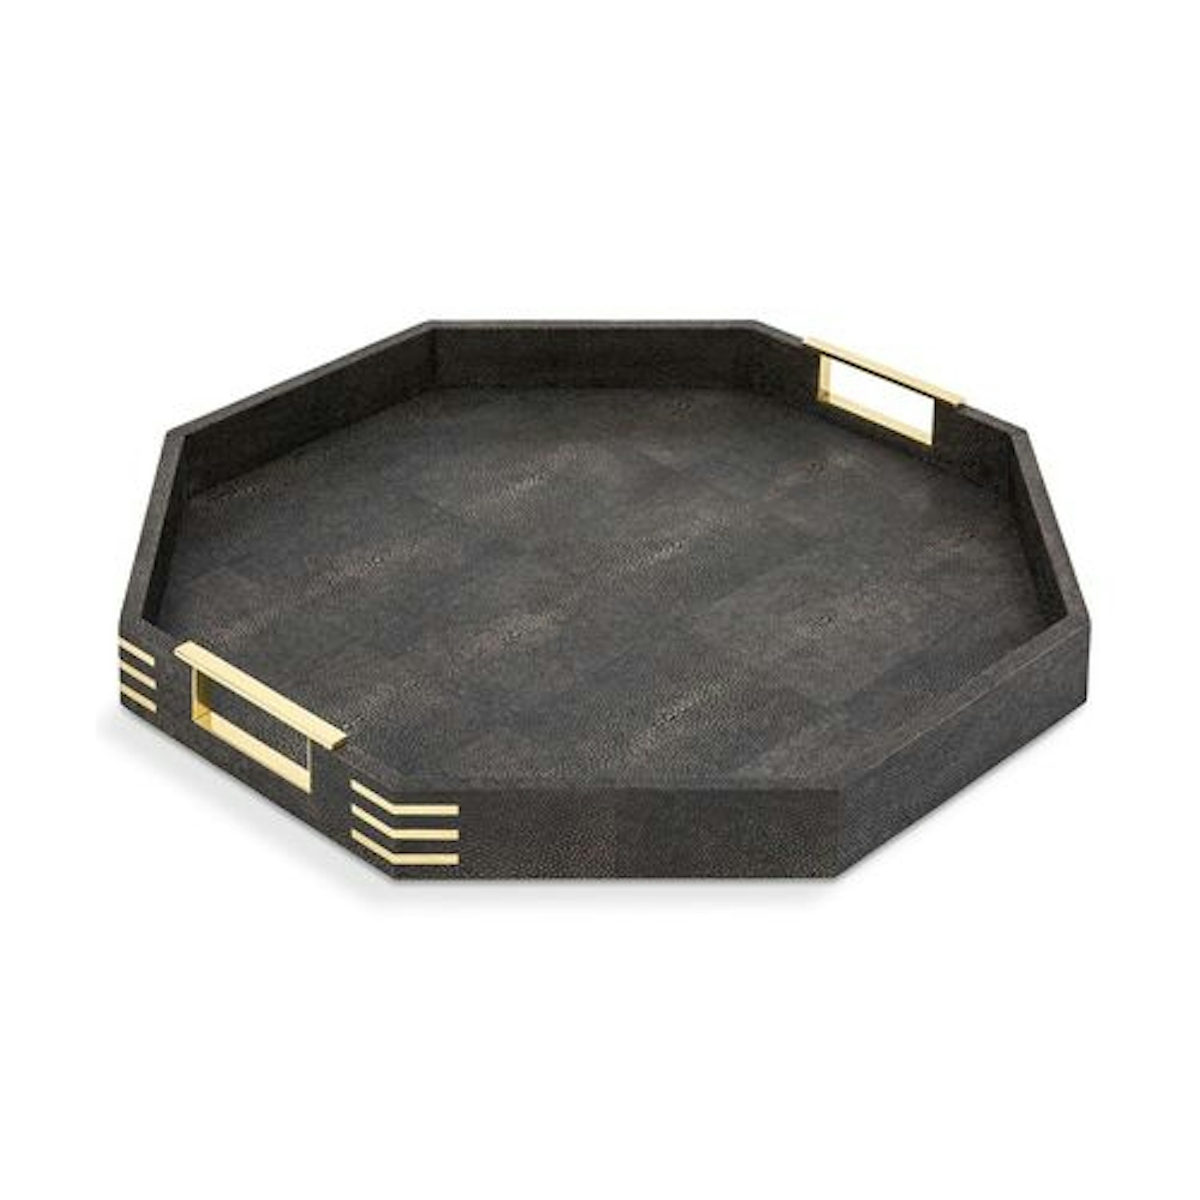 Holmes Octagonal Shagreen Tray - 21 Best Decorative Trays To Buy For Your Tabletop - LuxDeco.com